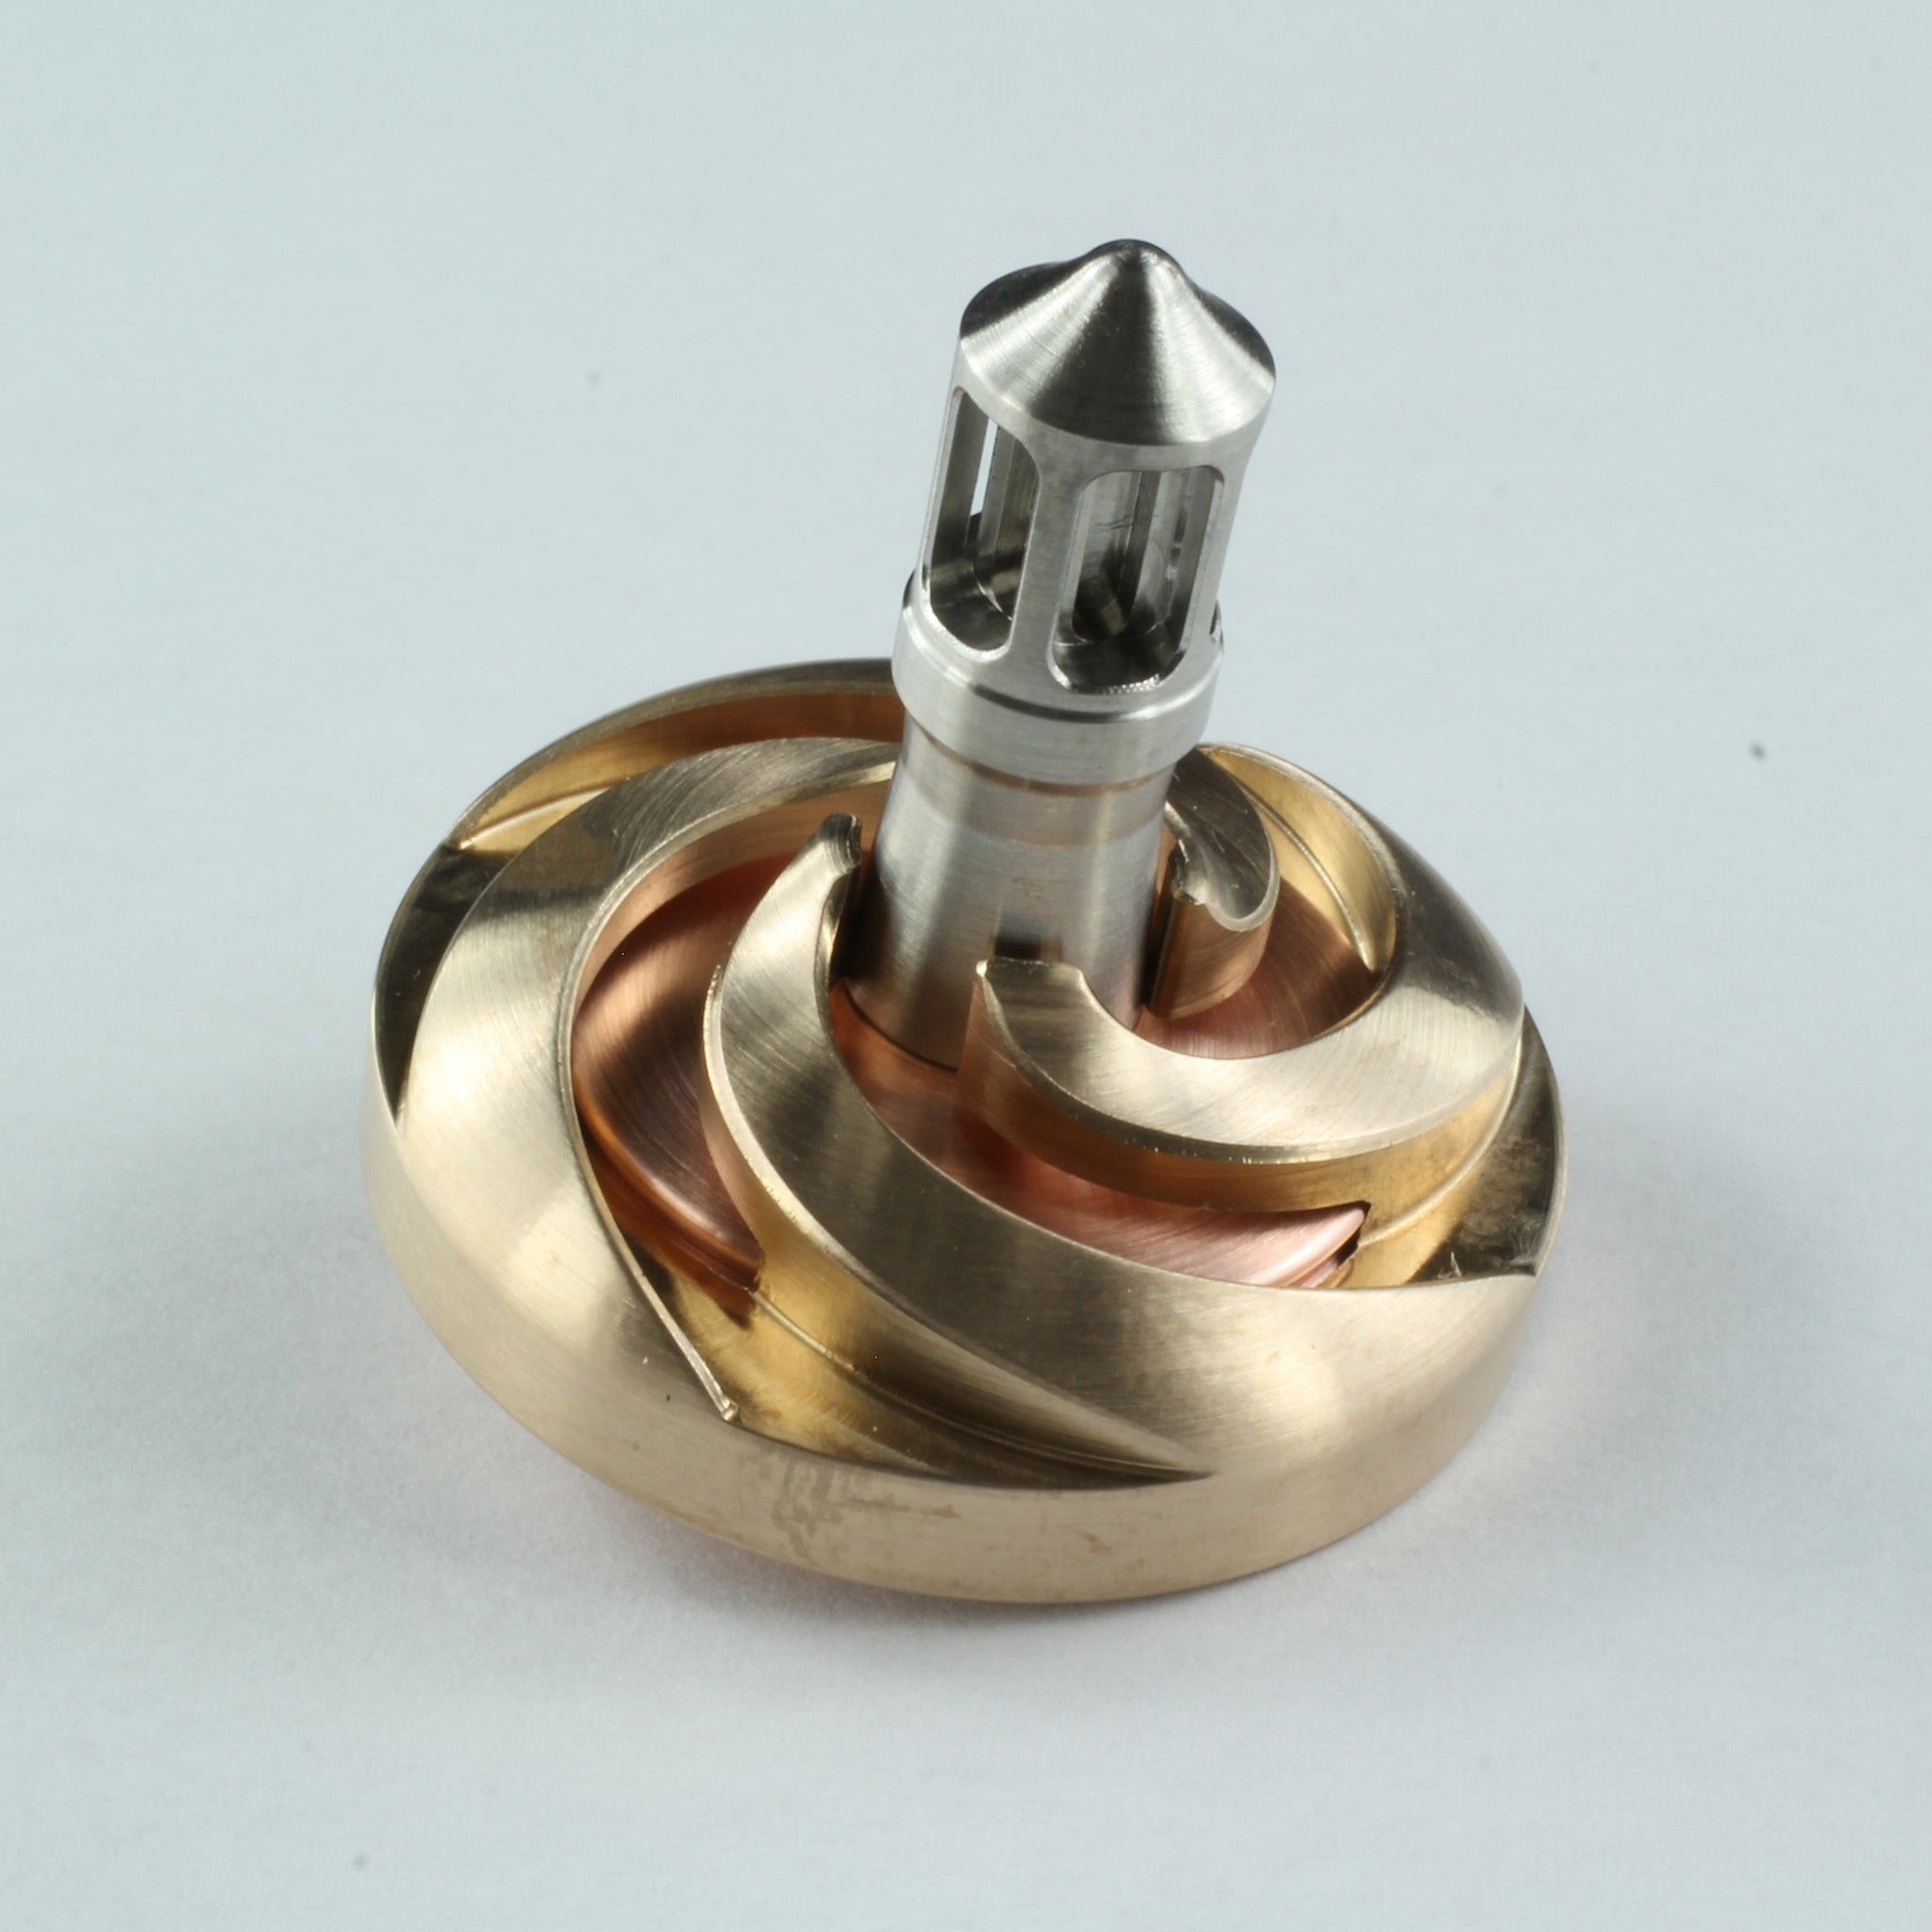 Storm - A Lighthouse-Themed Precision Spinning Top